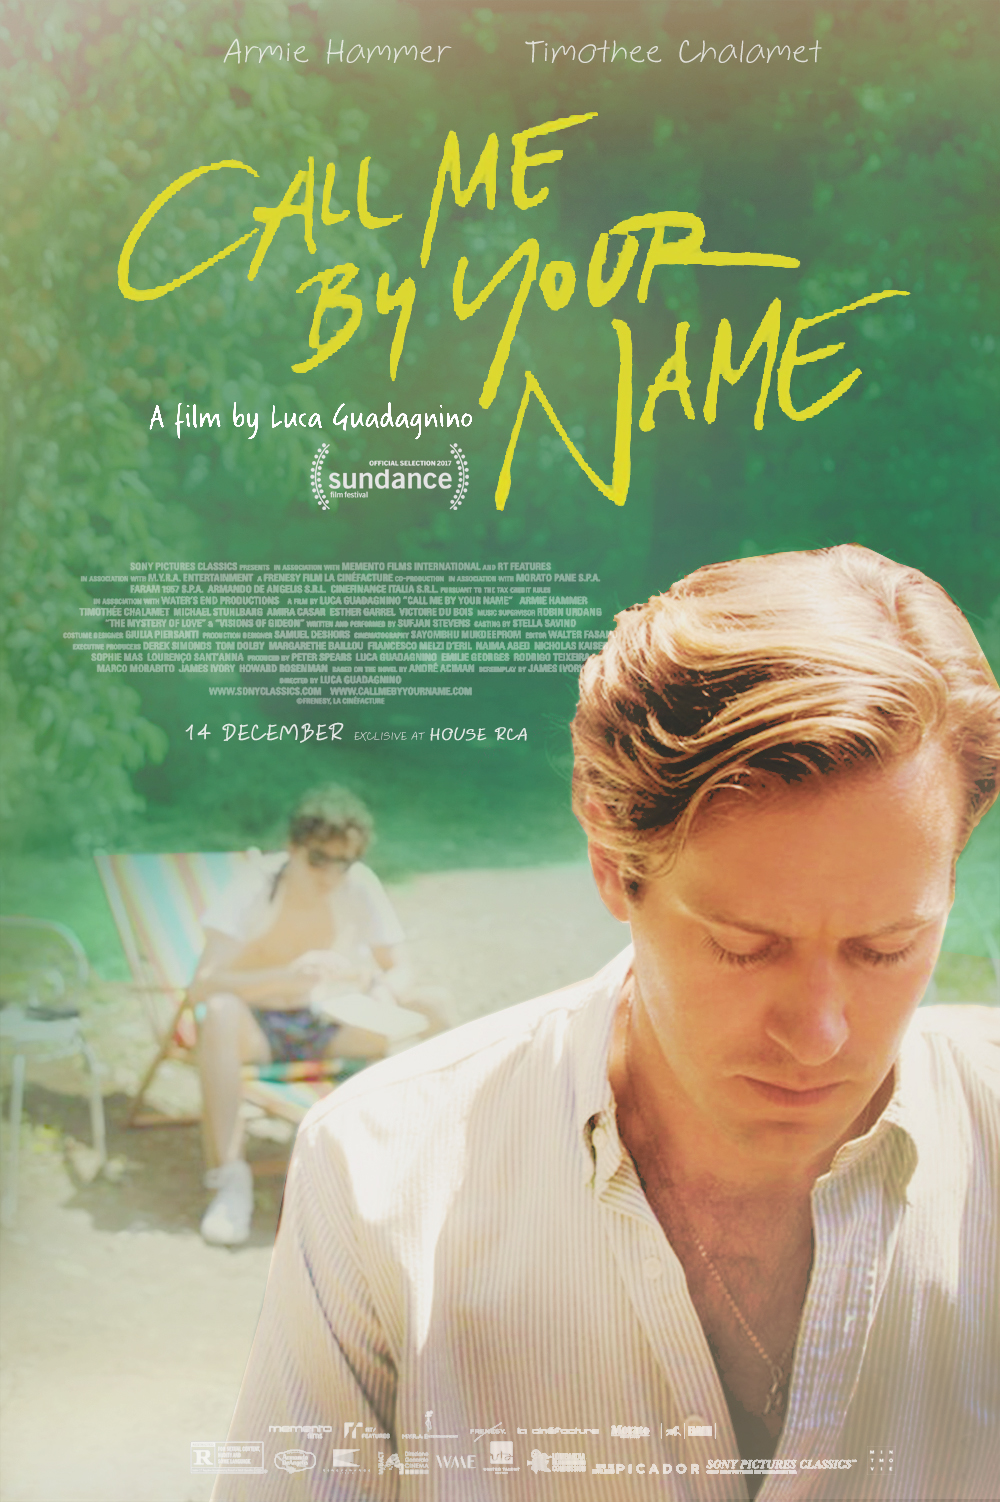 Call me by your name, le film de Luca Guadagnino